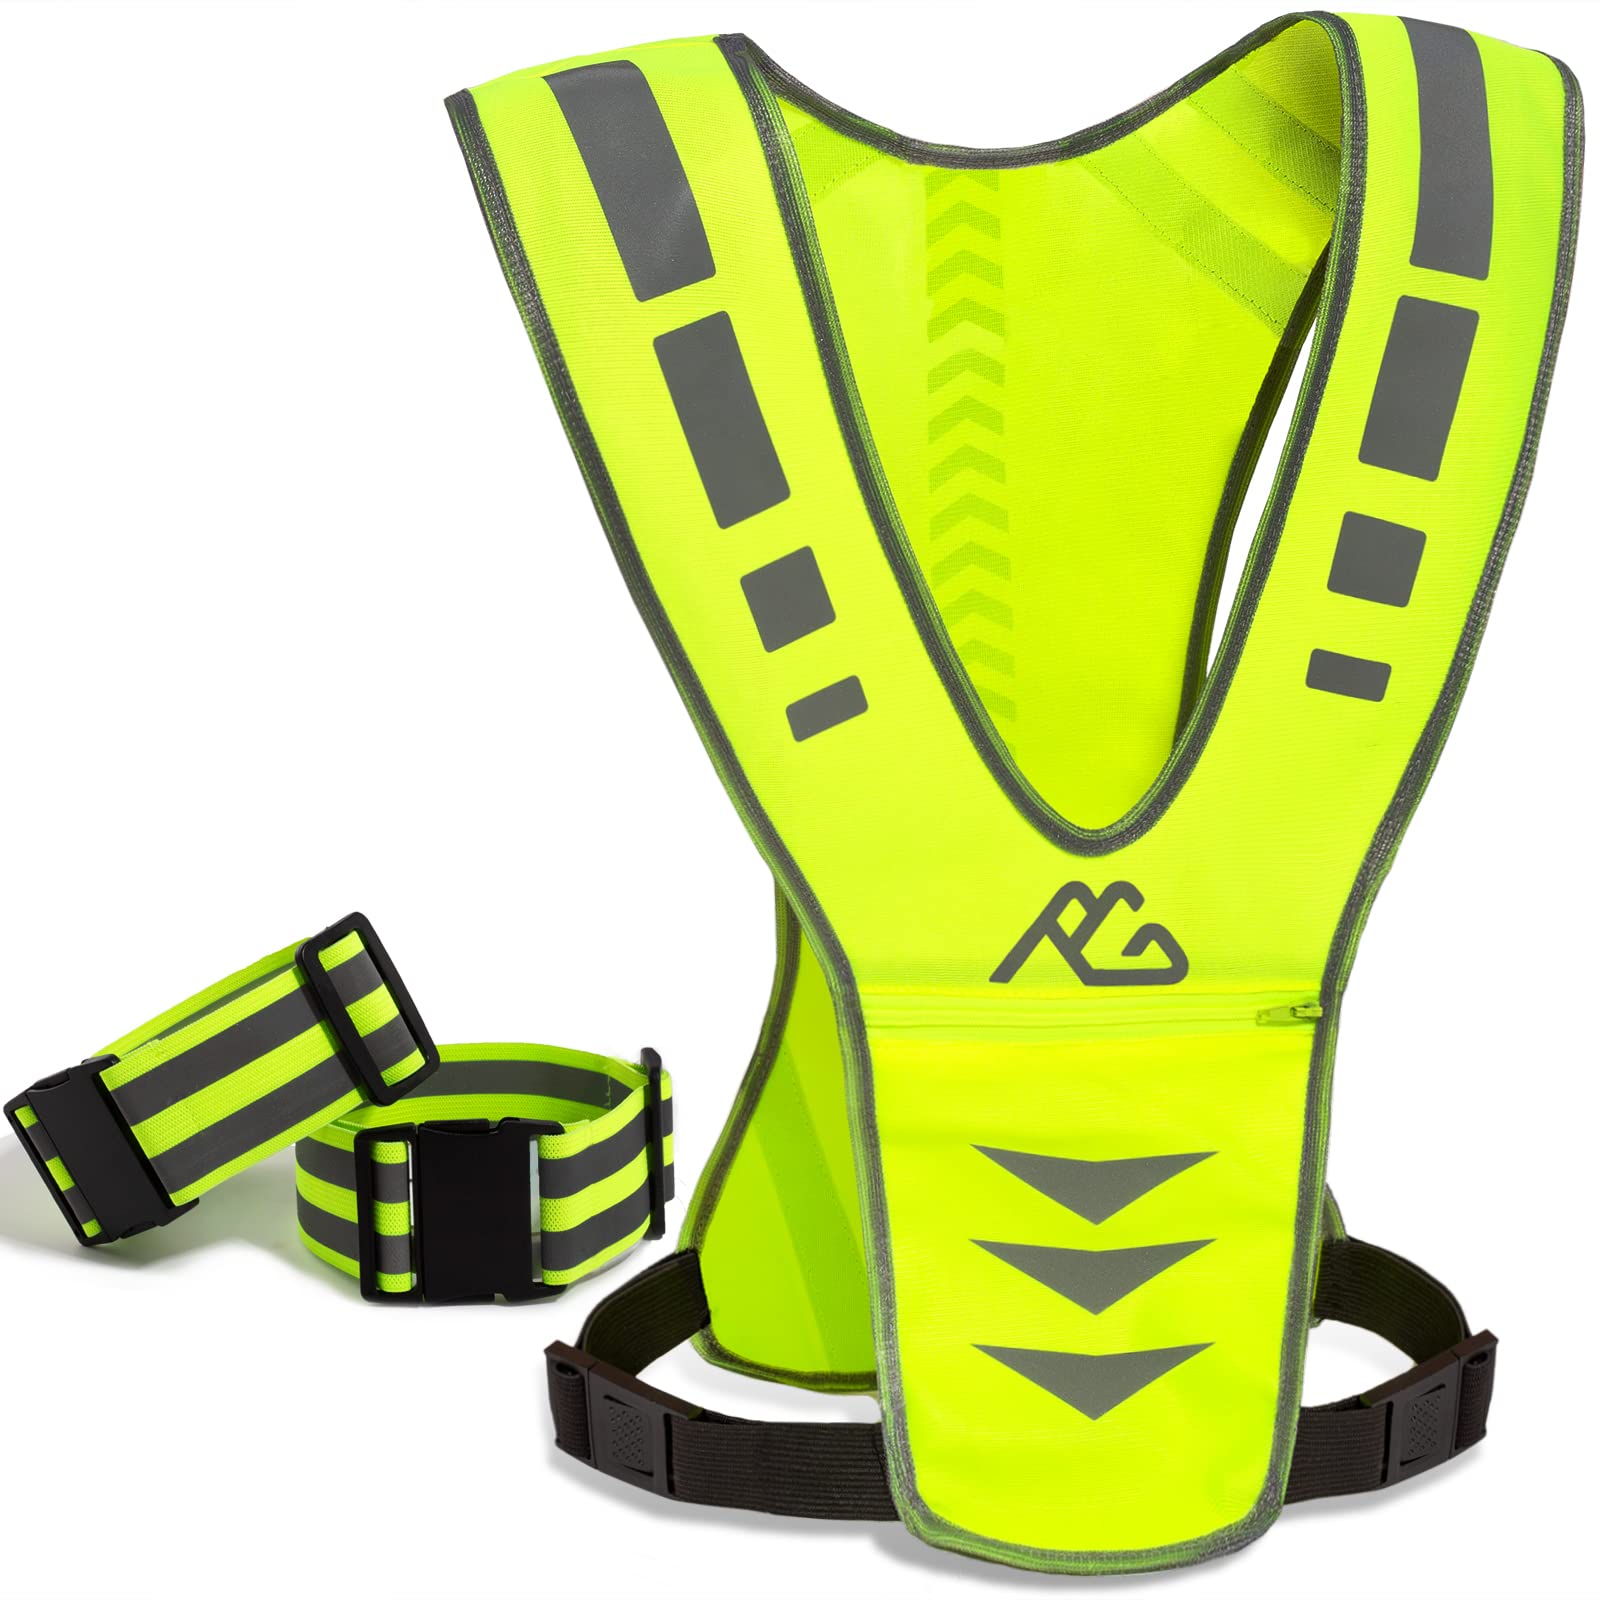 TOURUN Reflective Running Vest Gear with Pocket for Women Men Kids, Safety  Reflective Vest Bands for Night Cycling Walking Bicycle Jogging